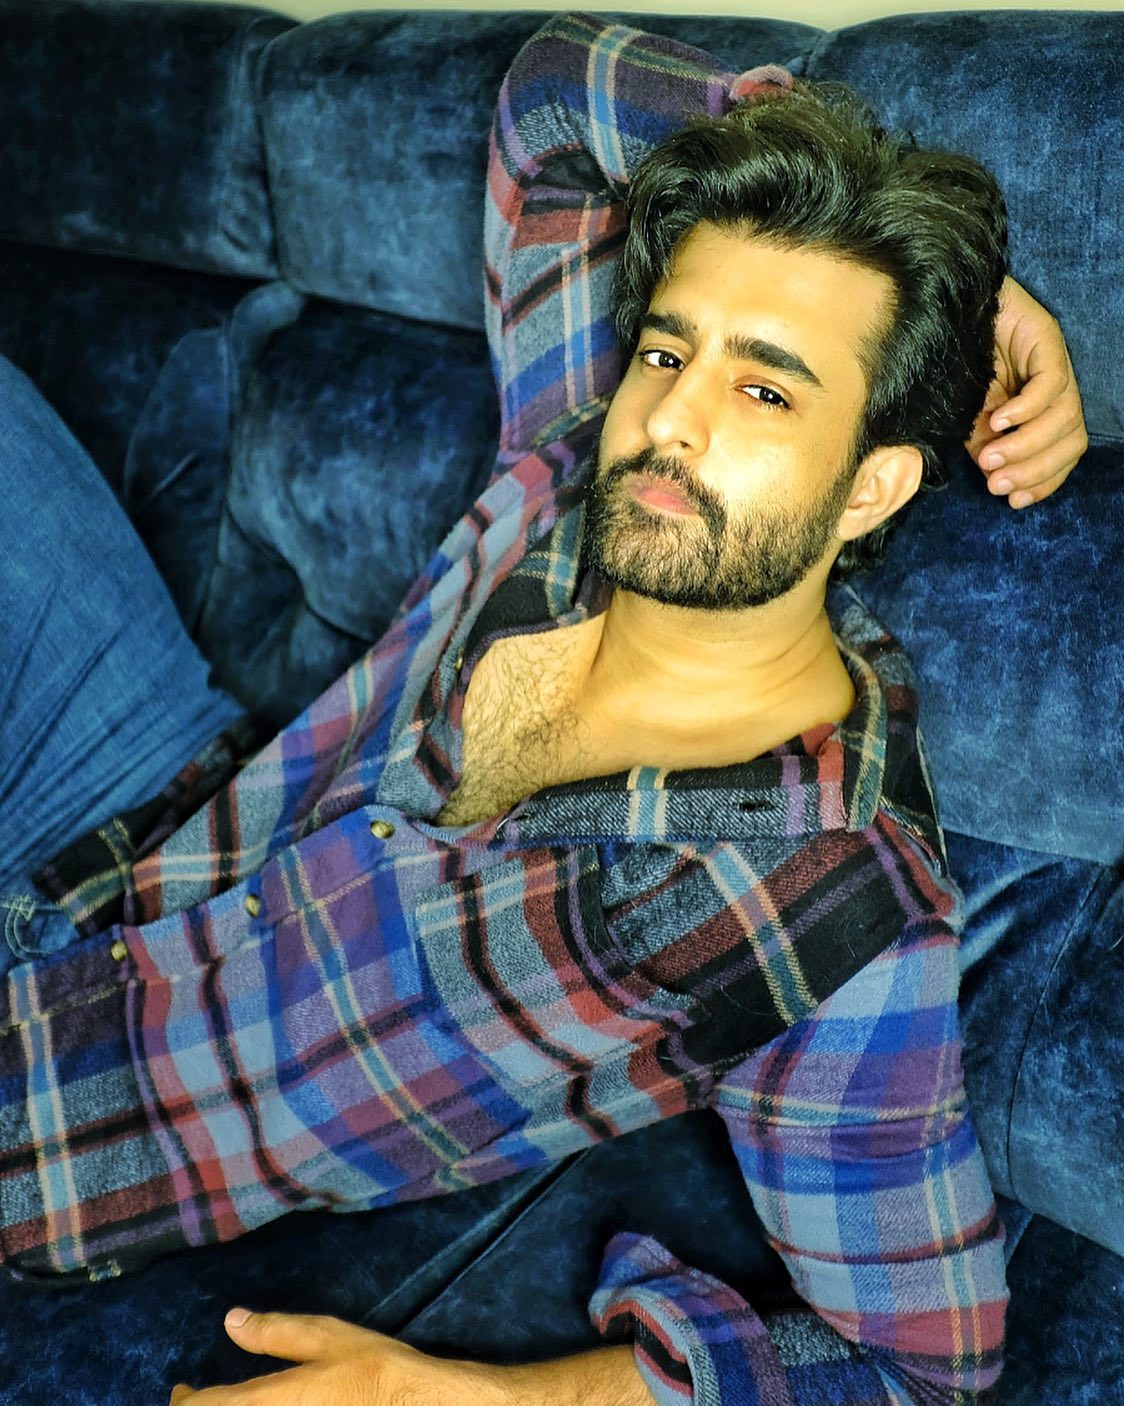 Exclusive! Satyajeet Dubey: 'I Was Jobless For 2 Years After Always Kabhi Kabhi'